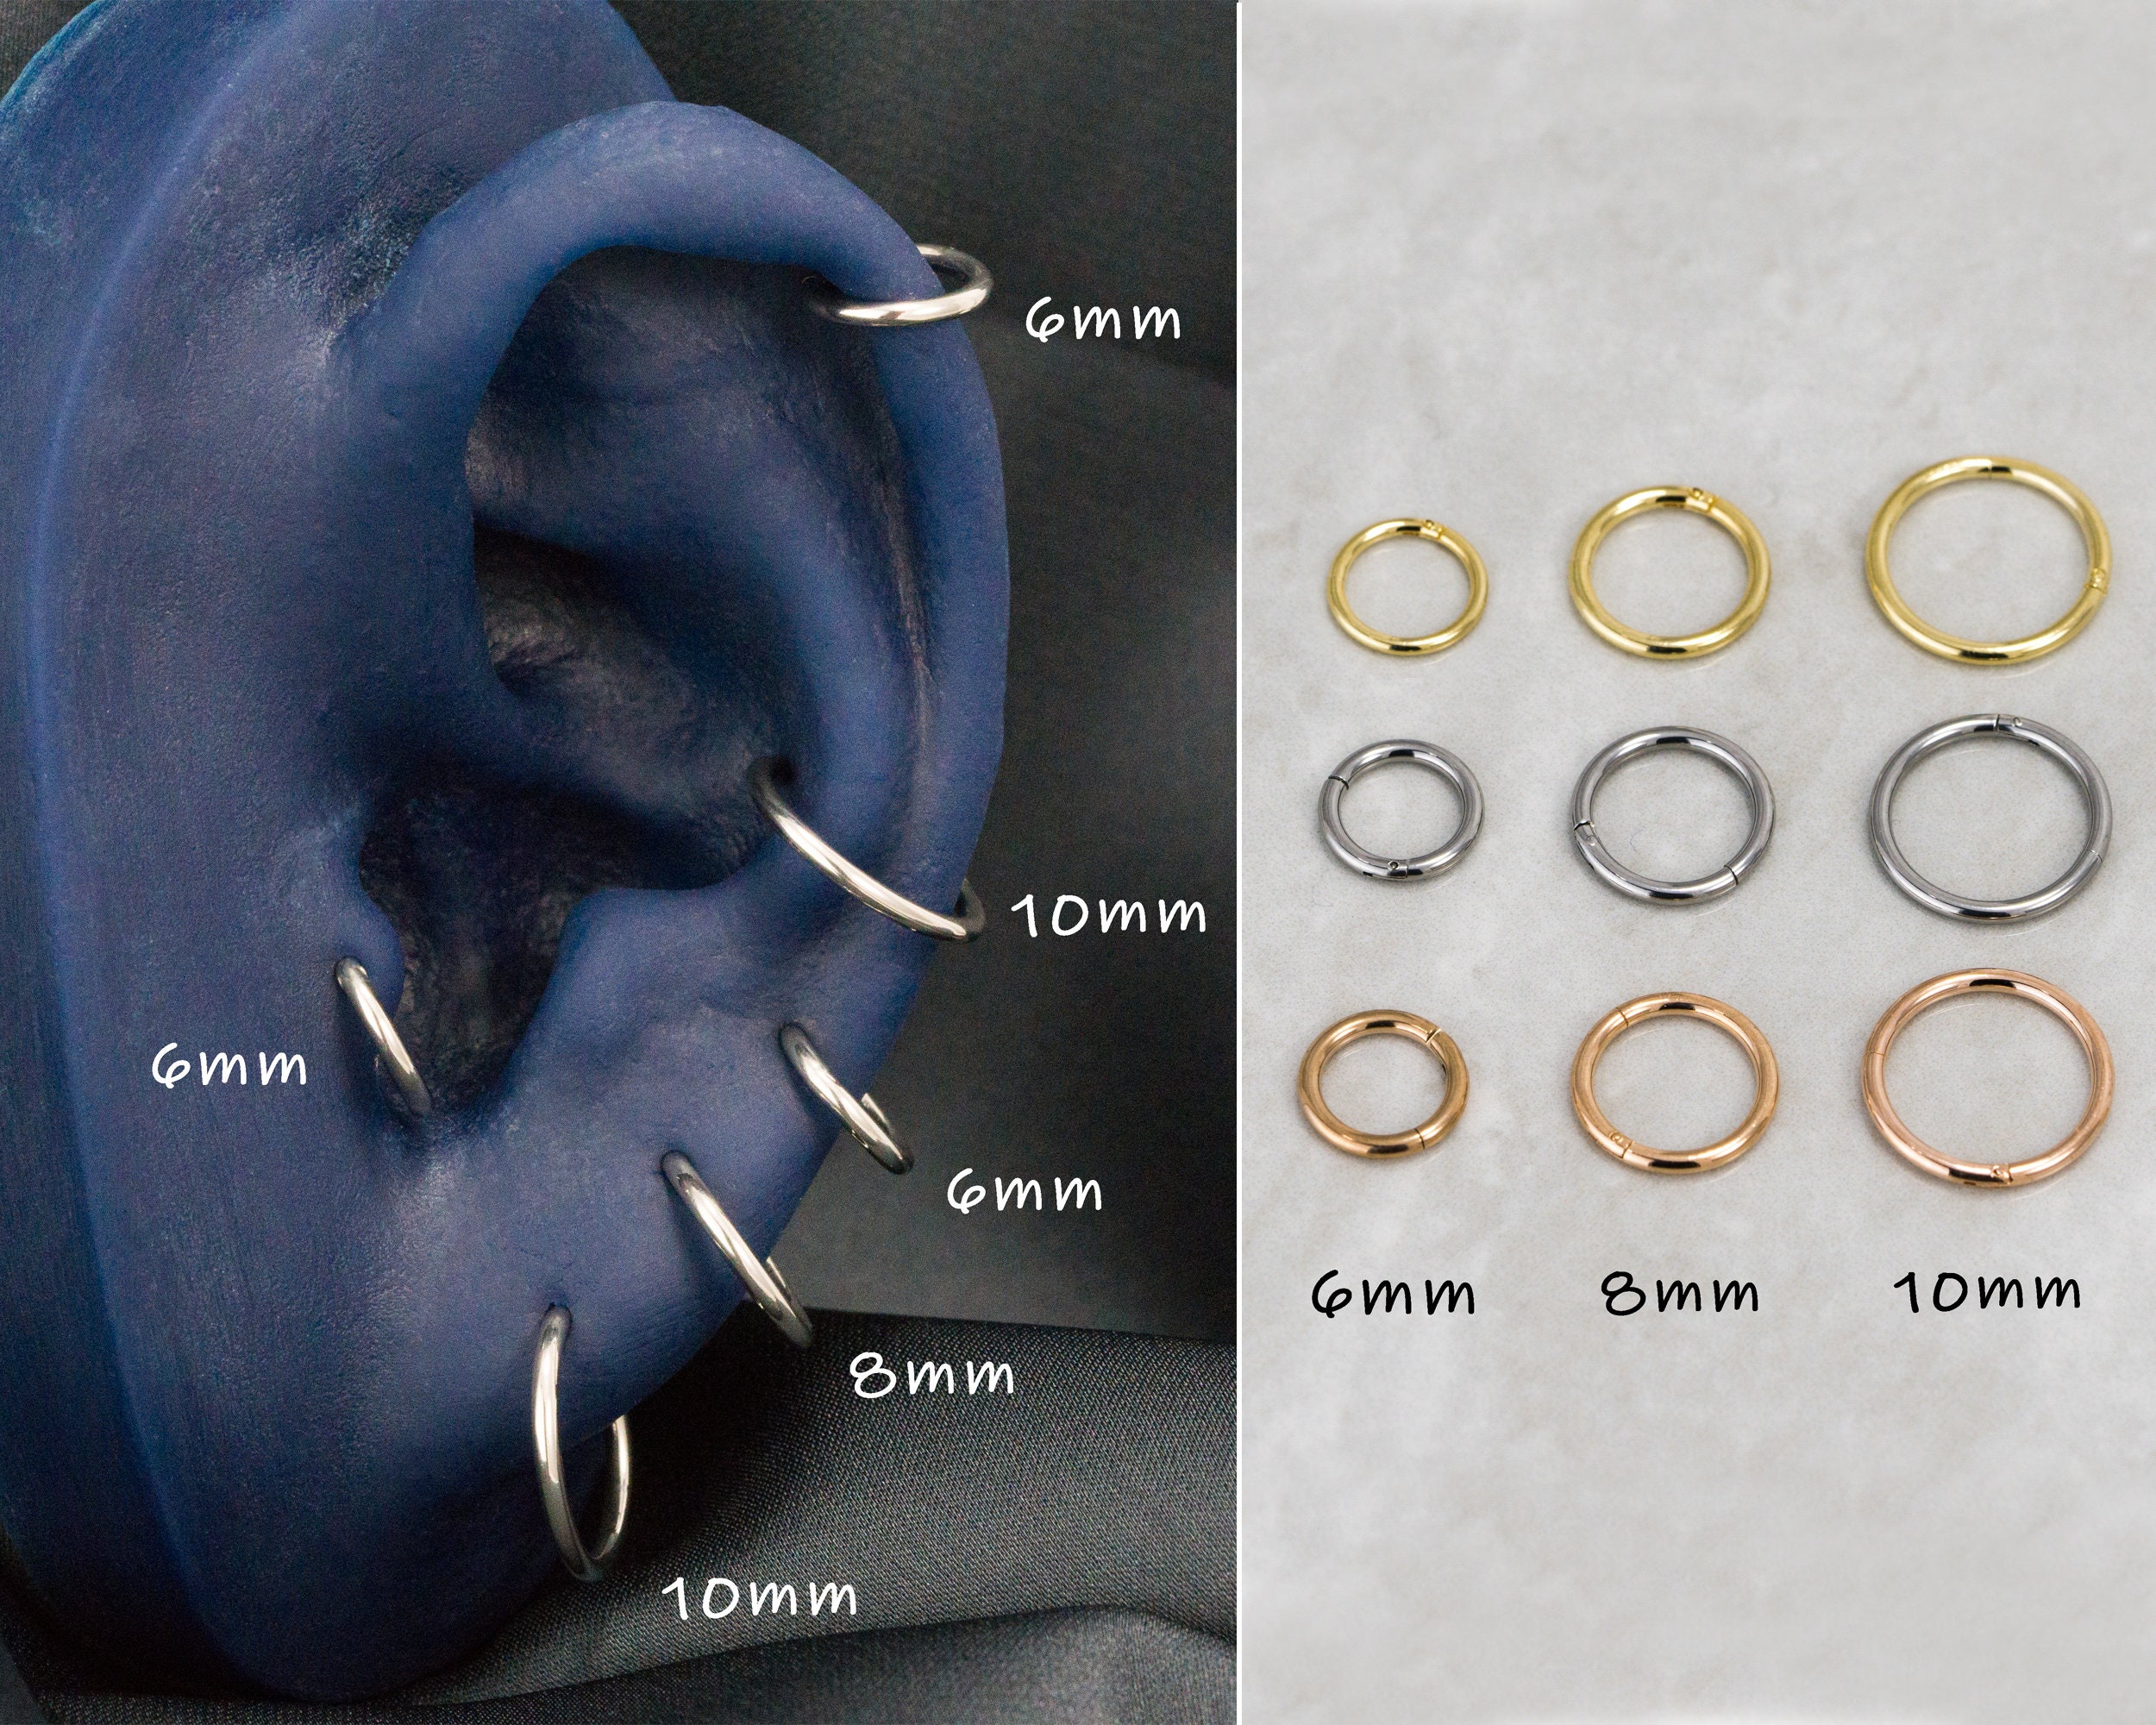 304 Stainless Steel Ear Nuts, Friction Earring Backs for Stud Earrings,  Stainless Steel Color, 5x4x2.5mm, Hole: 1mm